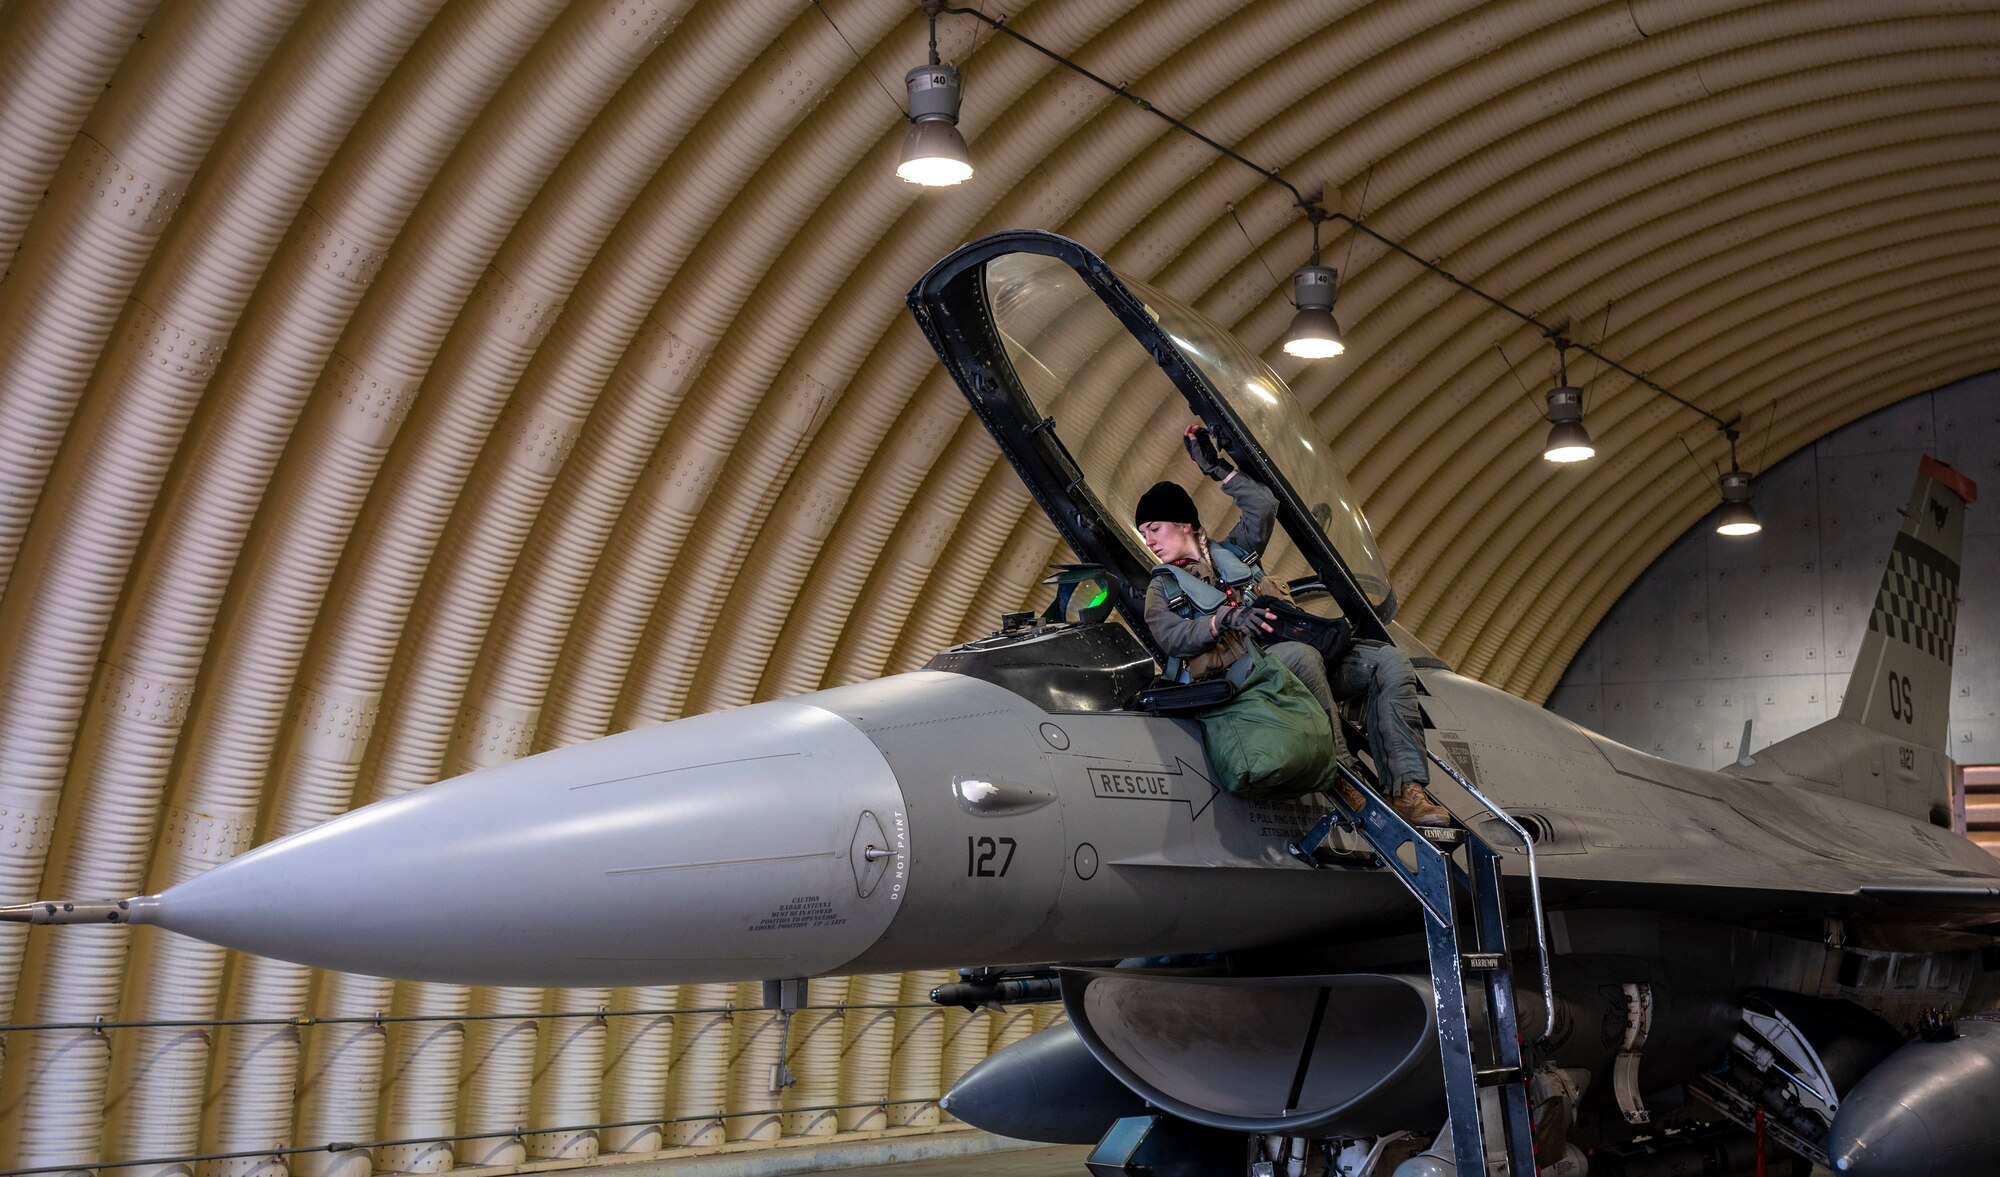 U.S. Air Force 1st Lt. Demi Yurcisin, 36th Fighter Squadron pilot, climbs into an F-16 Fighting Falcon during a routine training event at Daegu Air Base, Republic of Korea, Jan. 31, 2023.